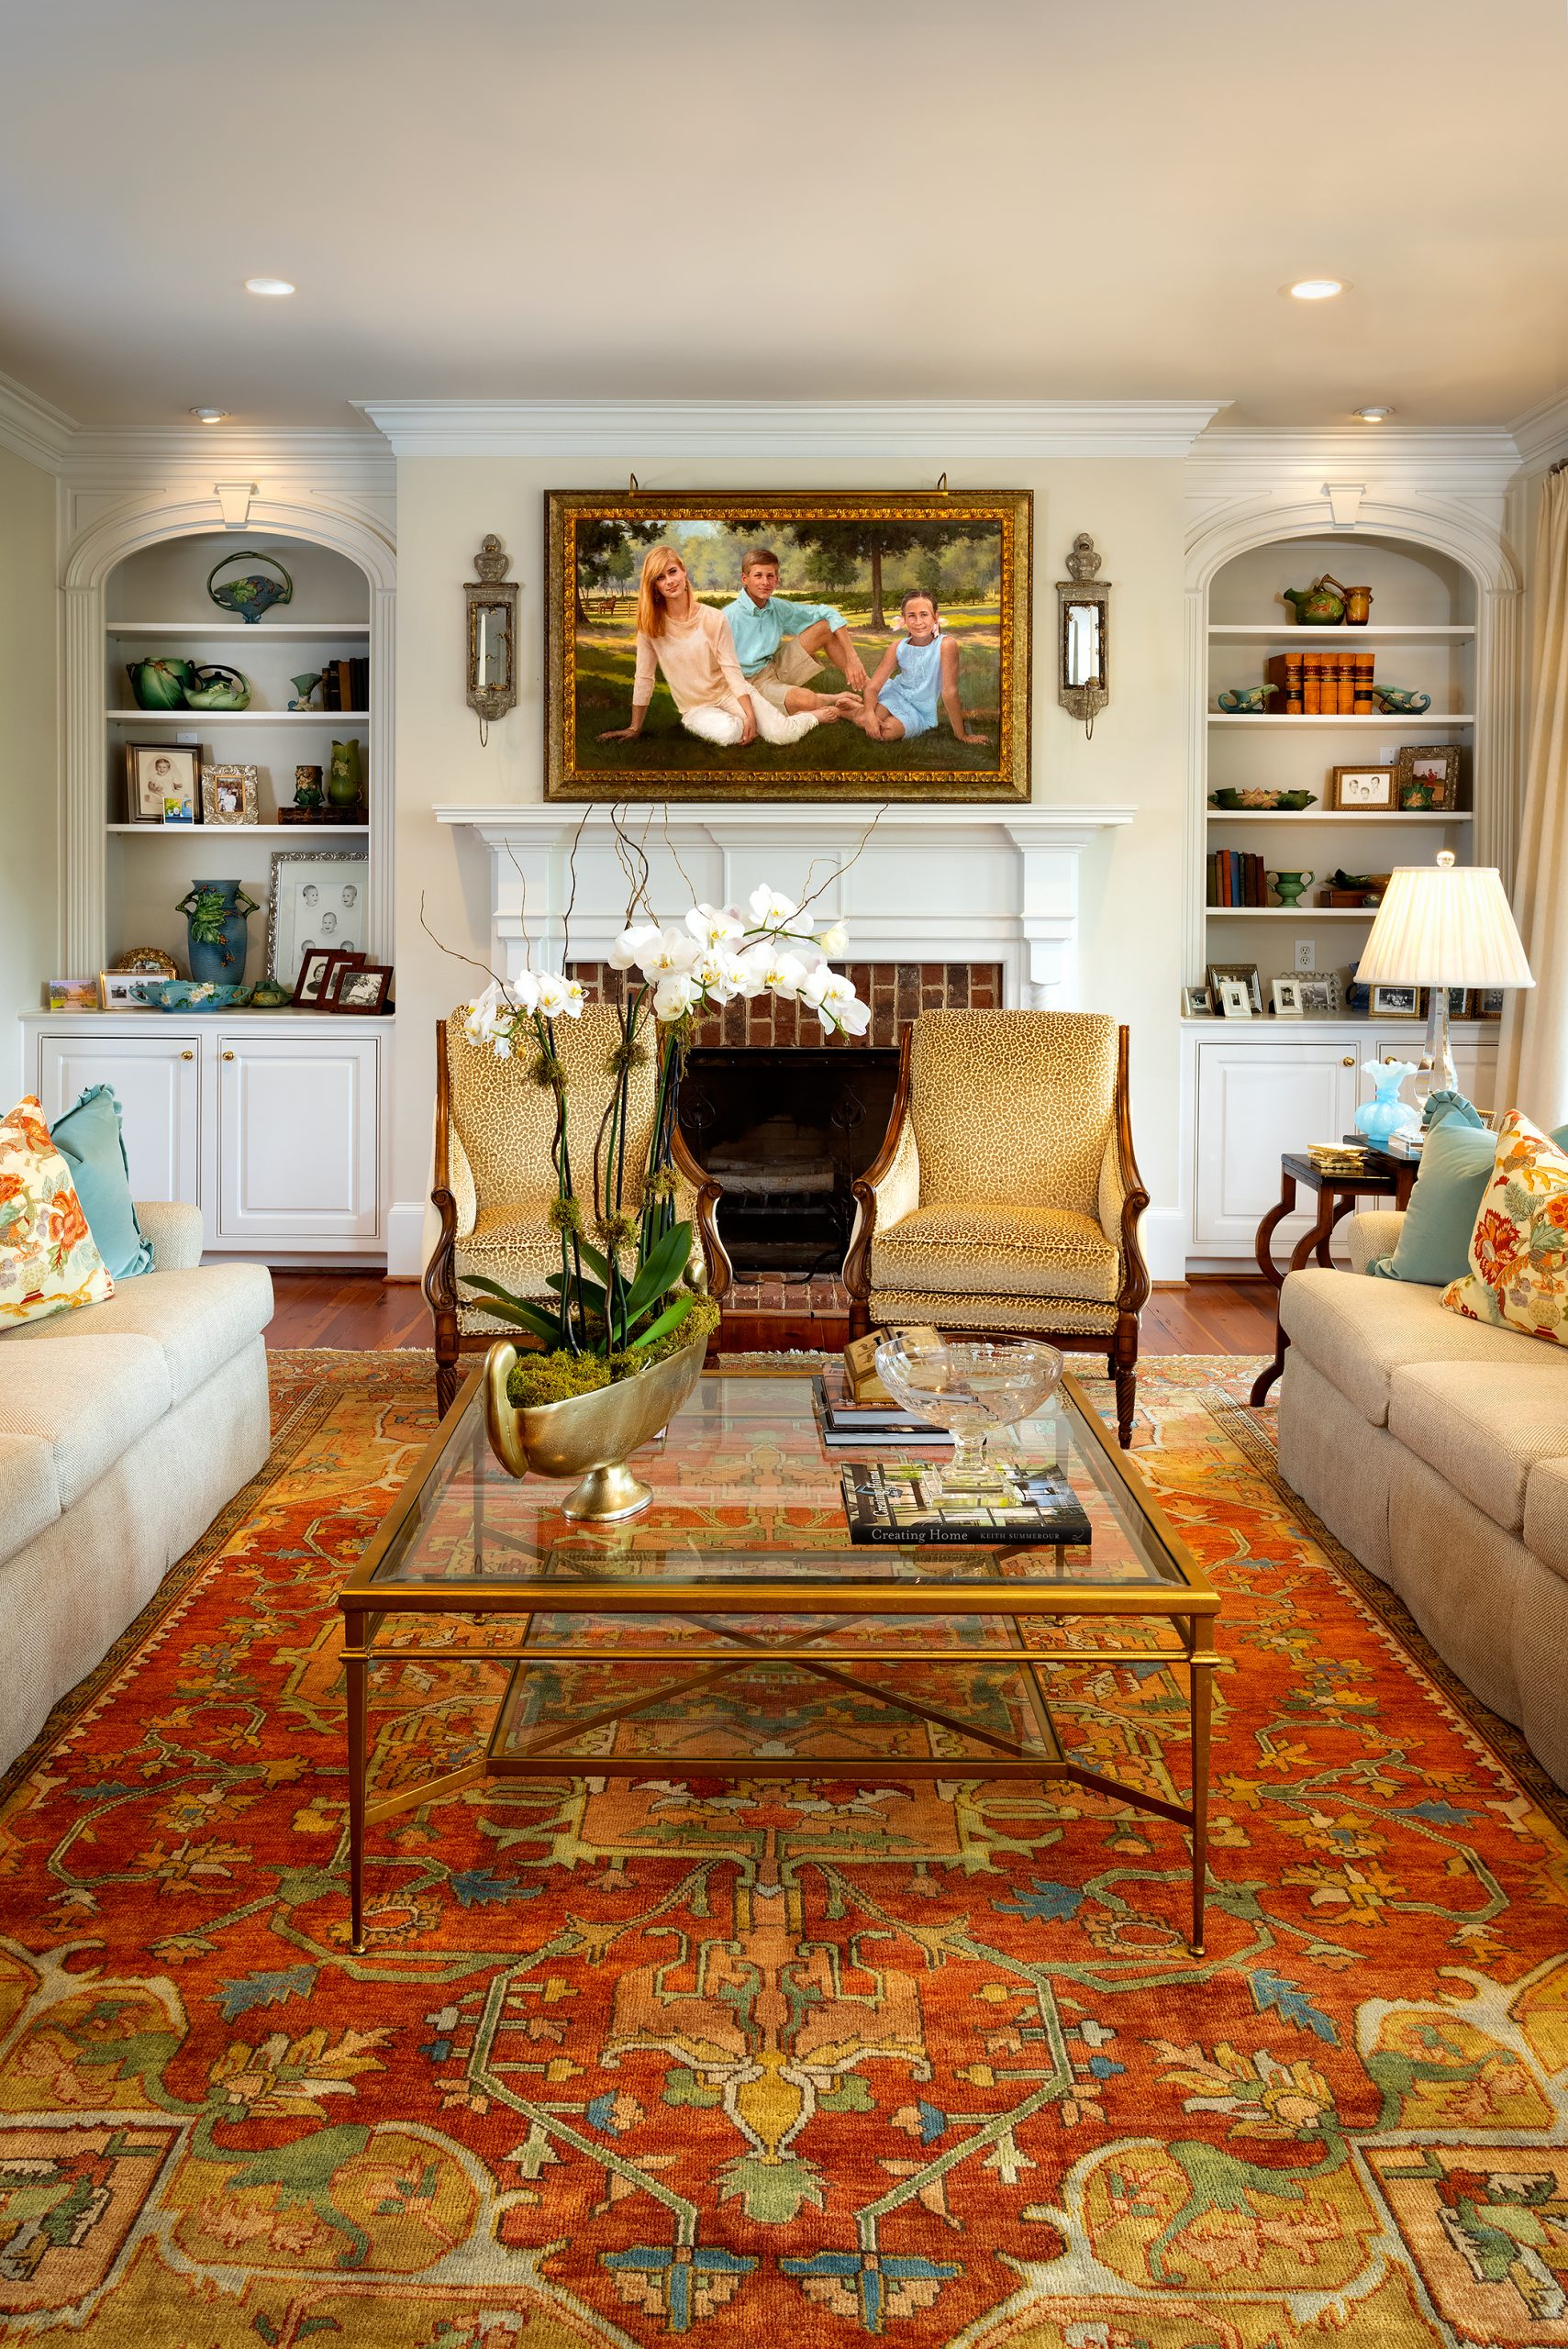 The Rhineharts’ living room is filled with natural light. It is anchored by a large dark apricot and gold rug laced with cream, blue, and green, which forms the color palette for the home. Above the fireplace is a portrait of their children, Gabbie, Hamilton, and Ellie, along with Sammee, the horse the children took care of when they were younger. Kelli credits Darby Schroder, her interior designer, for the cohesiveness of the color scheme throughout the house. 